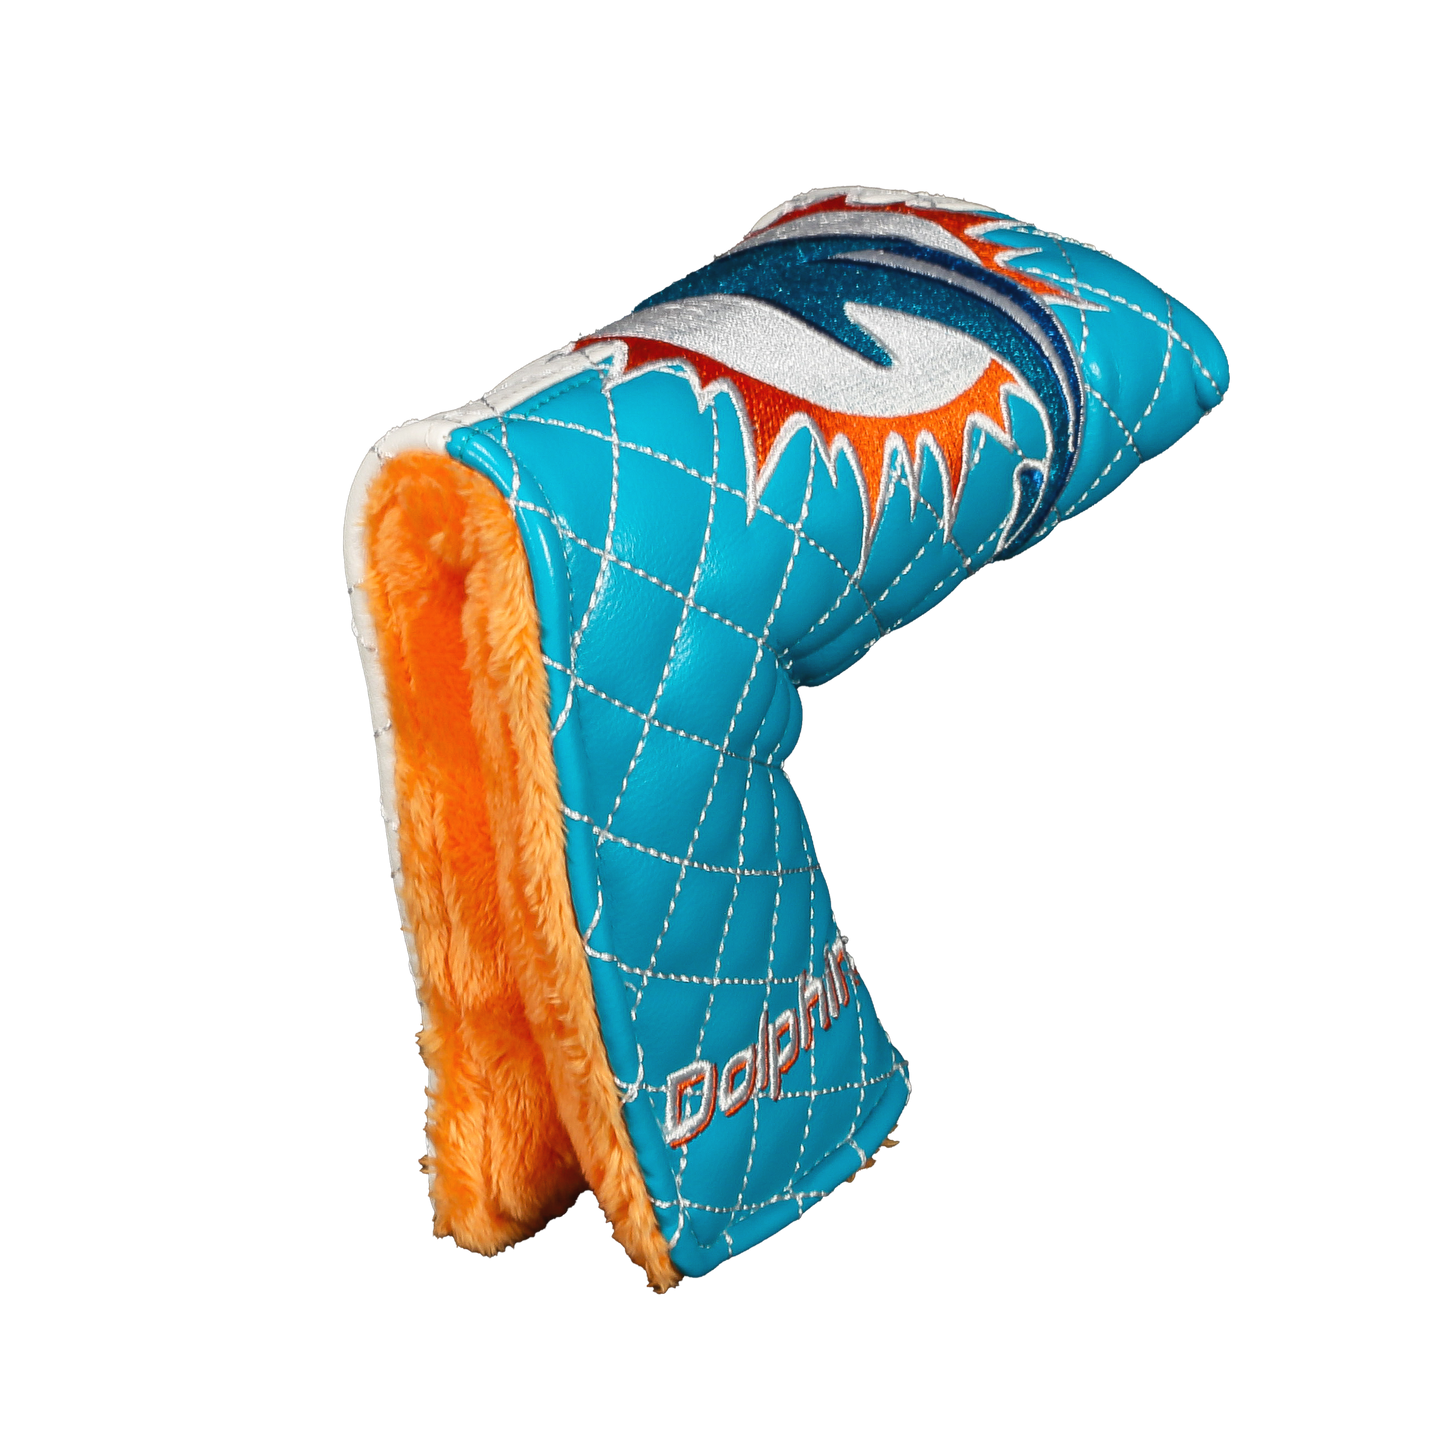 Miami "Dolphins" Blade Putter Cover